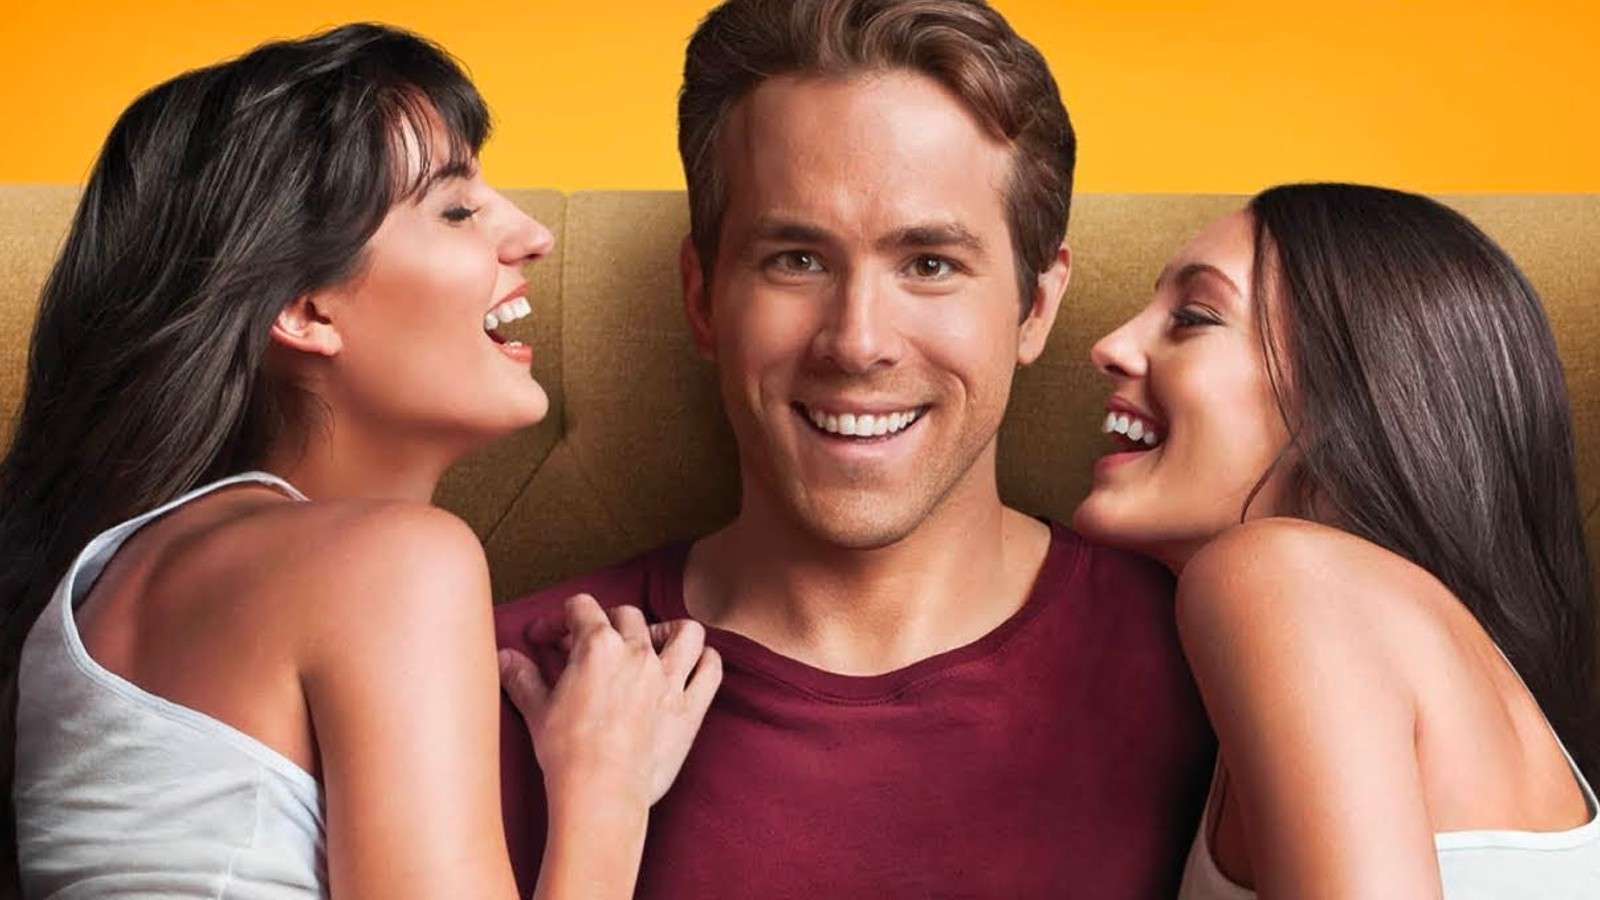 Ryan Reynolds on the poster for The Change-Up